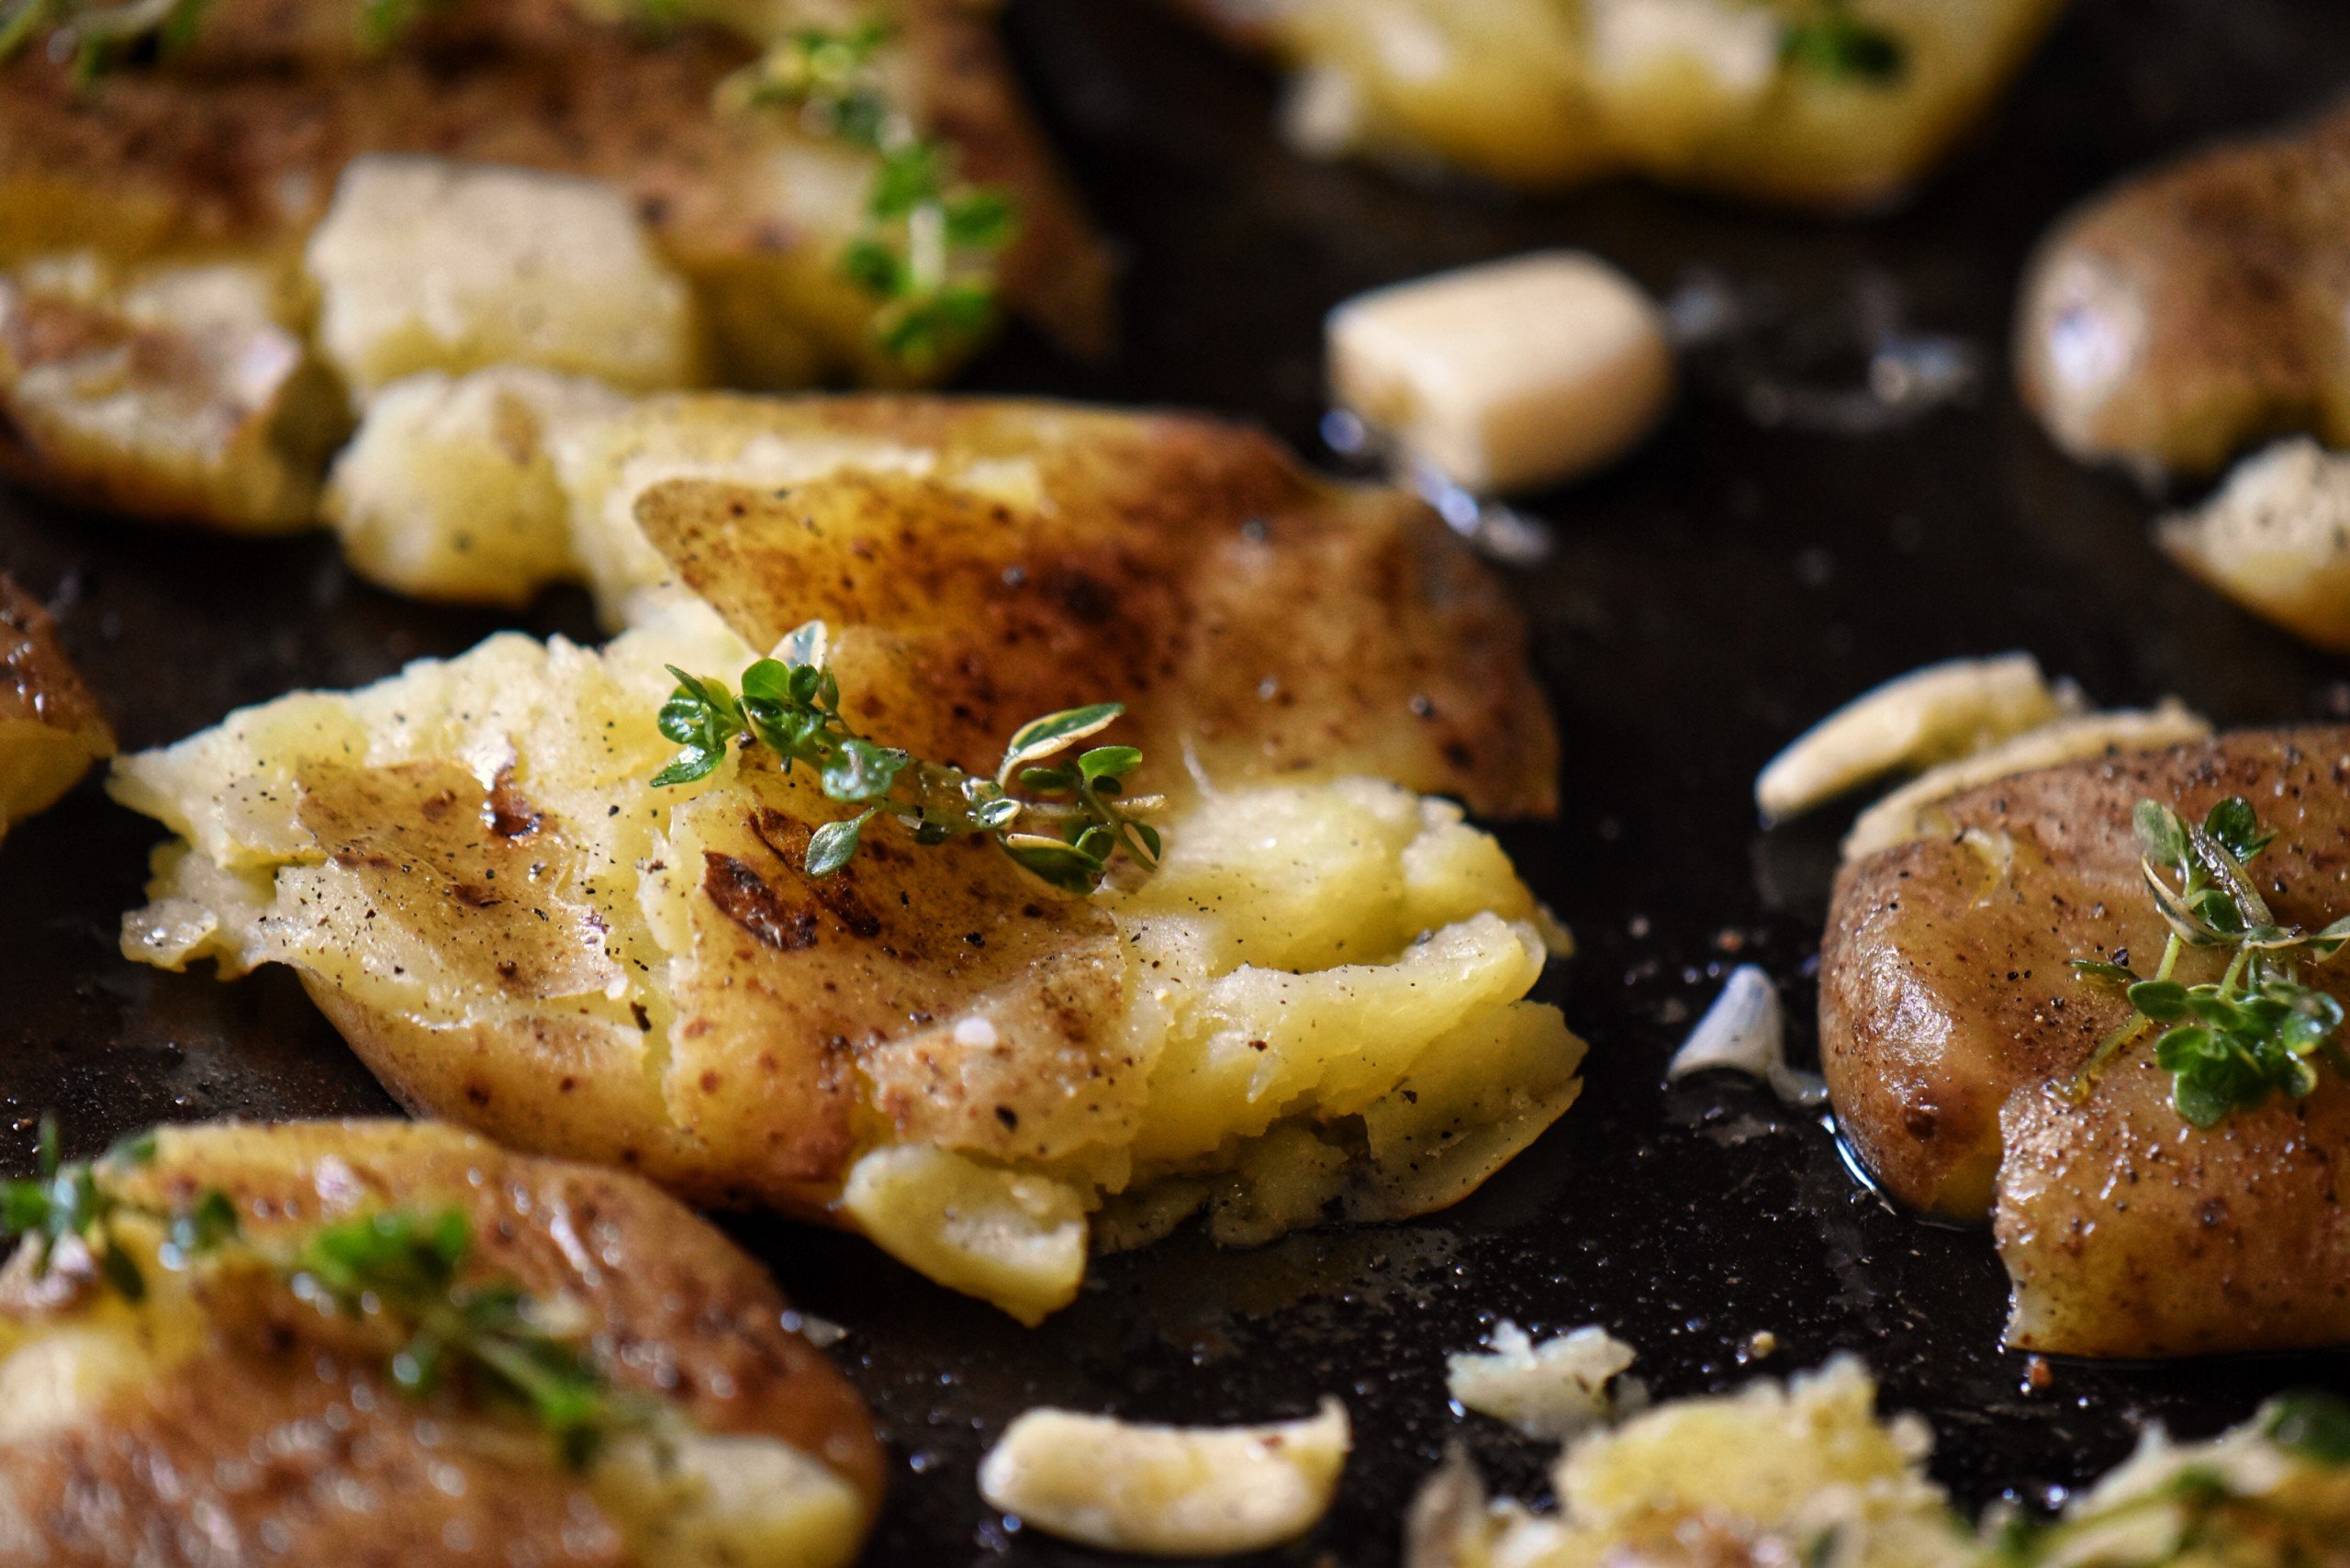 Creamer potatoes garnished with thyme sprigs on a sheet pan.